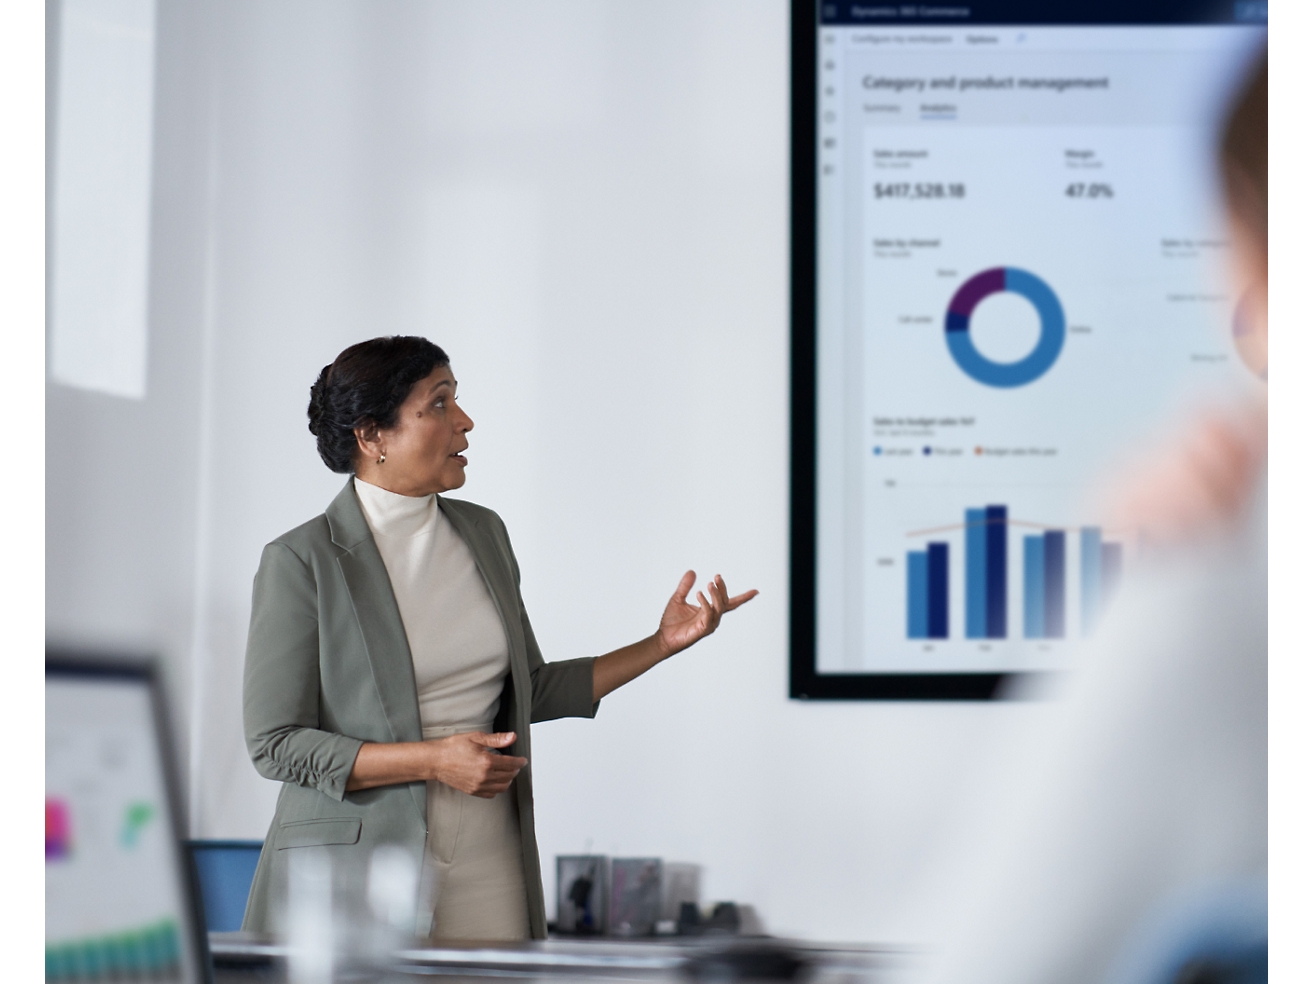 A professional woman presents financial data on a screen to her audience in a modern office setting.